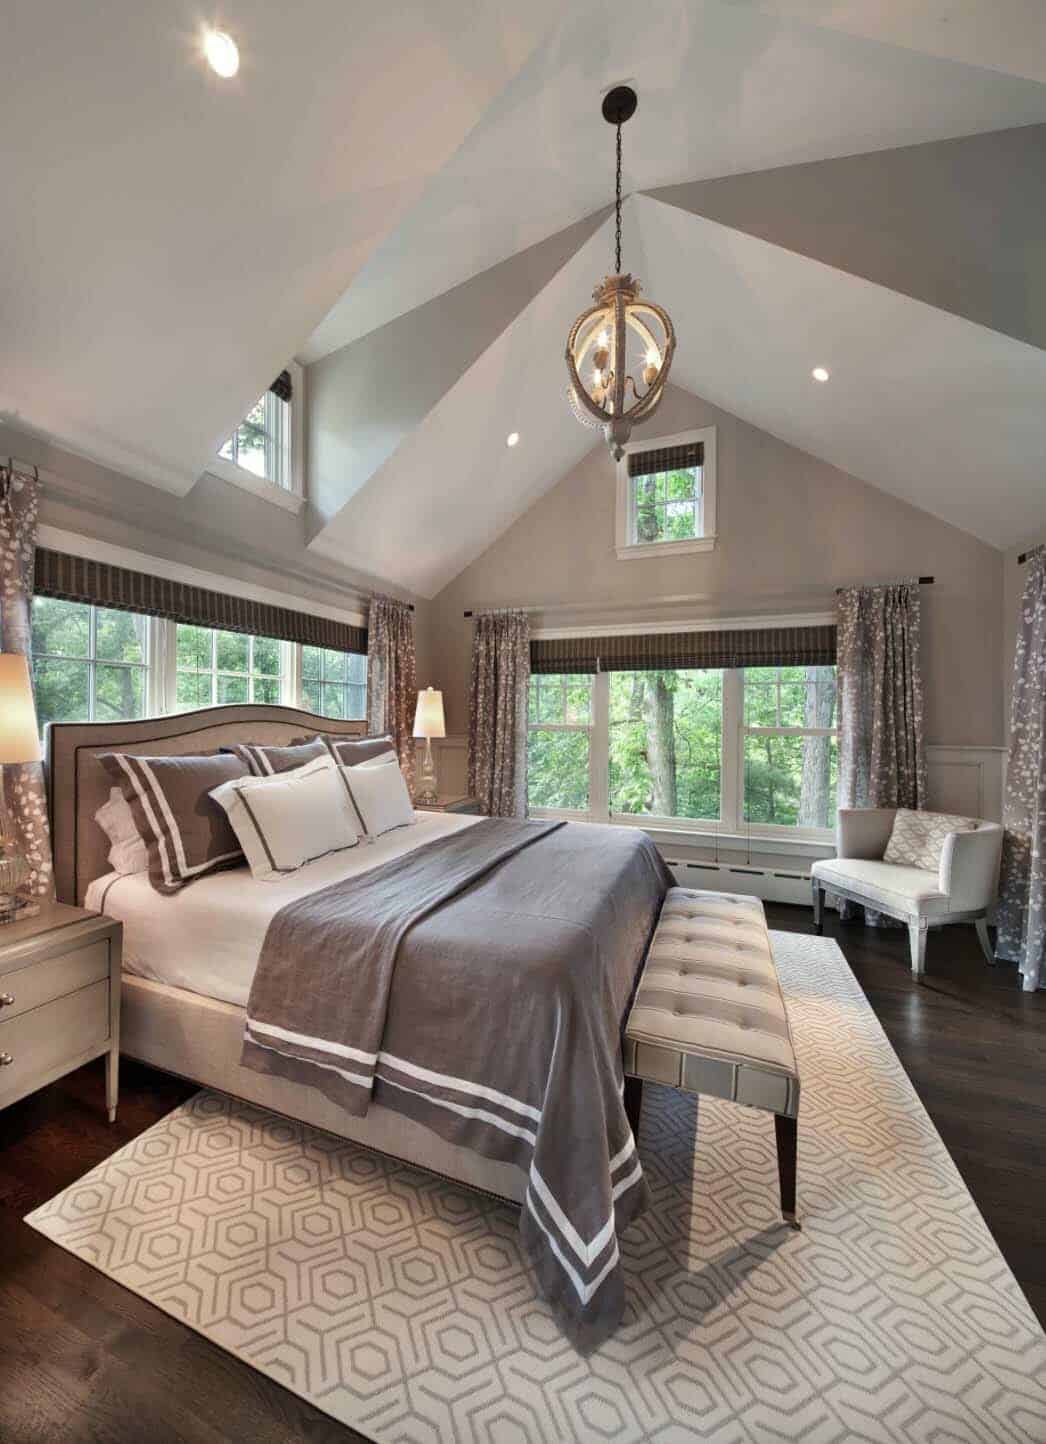 25 Absolutely Stunning Master Bedroom Color Scheme Ideas,Arts And Crafts Living Room Ideas